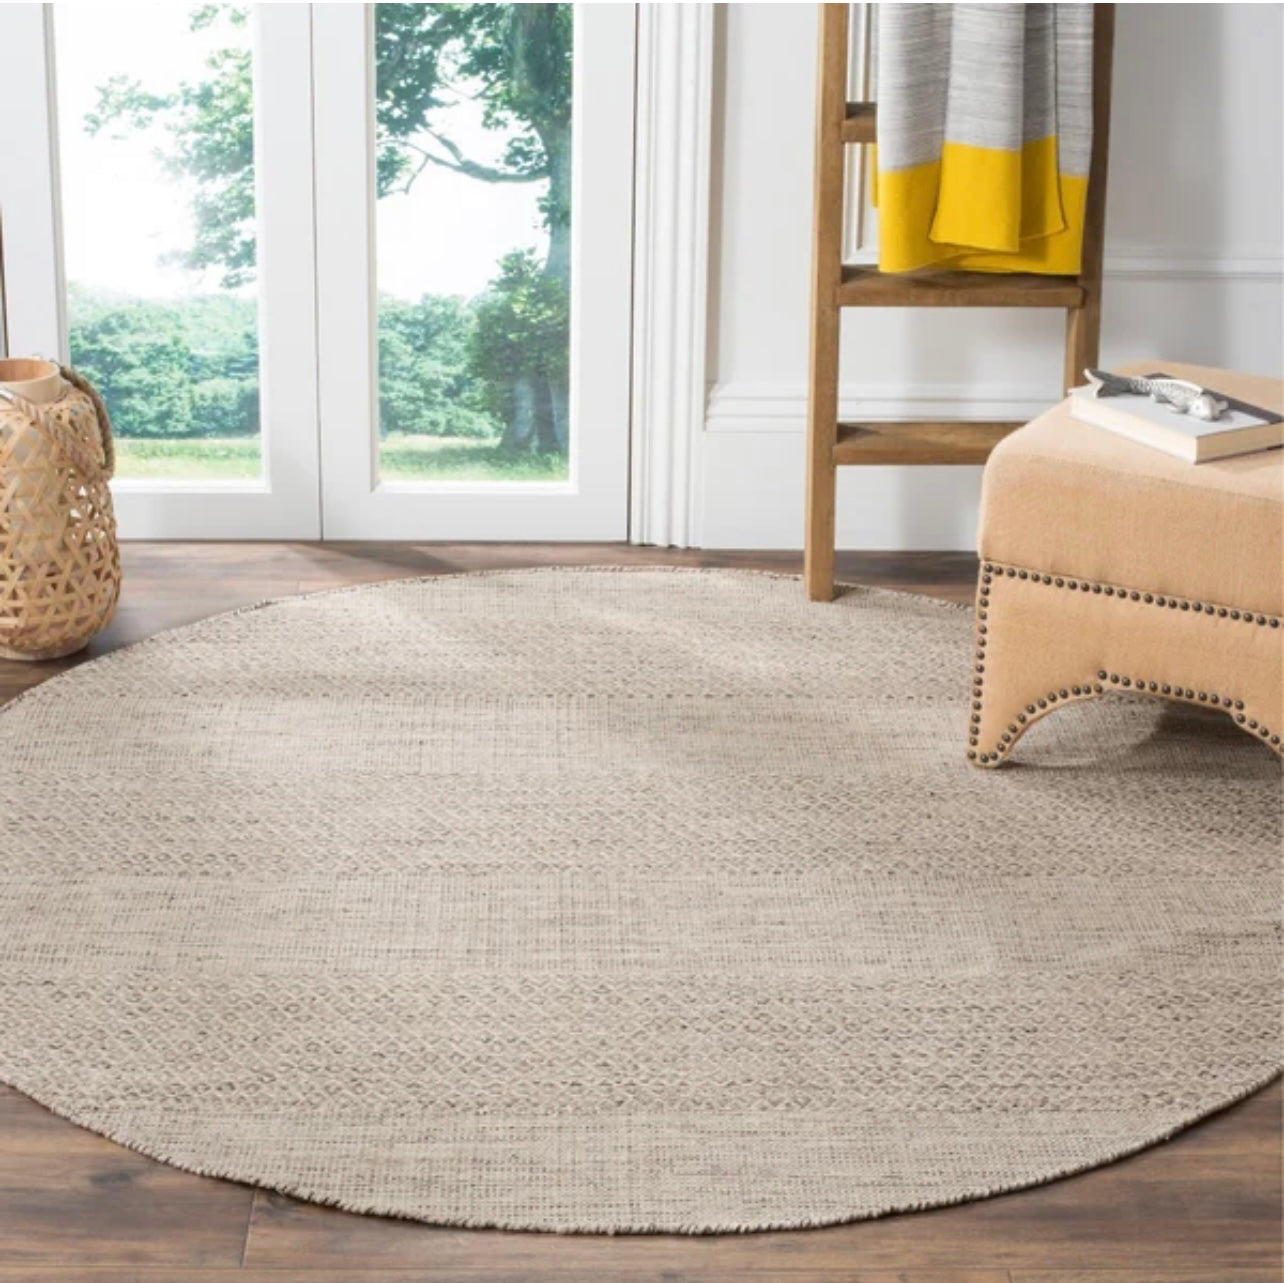 Round Woven Rug | Striped